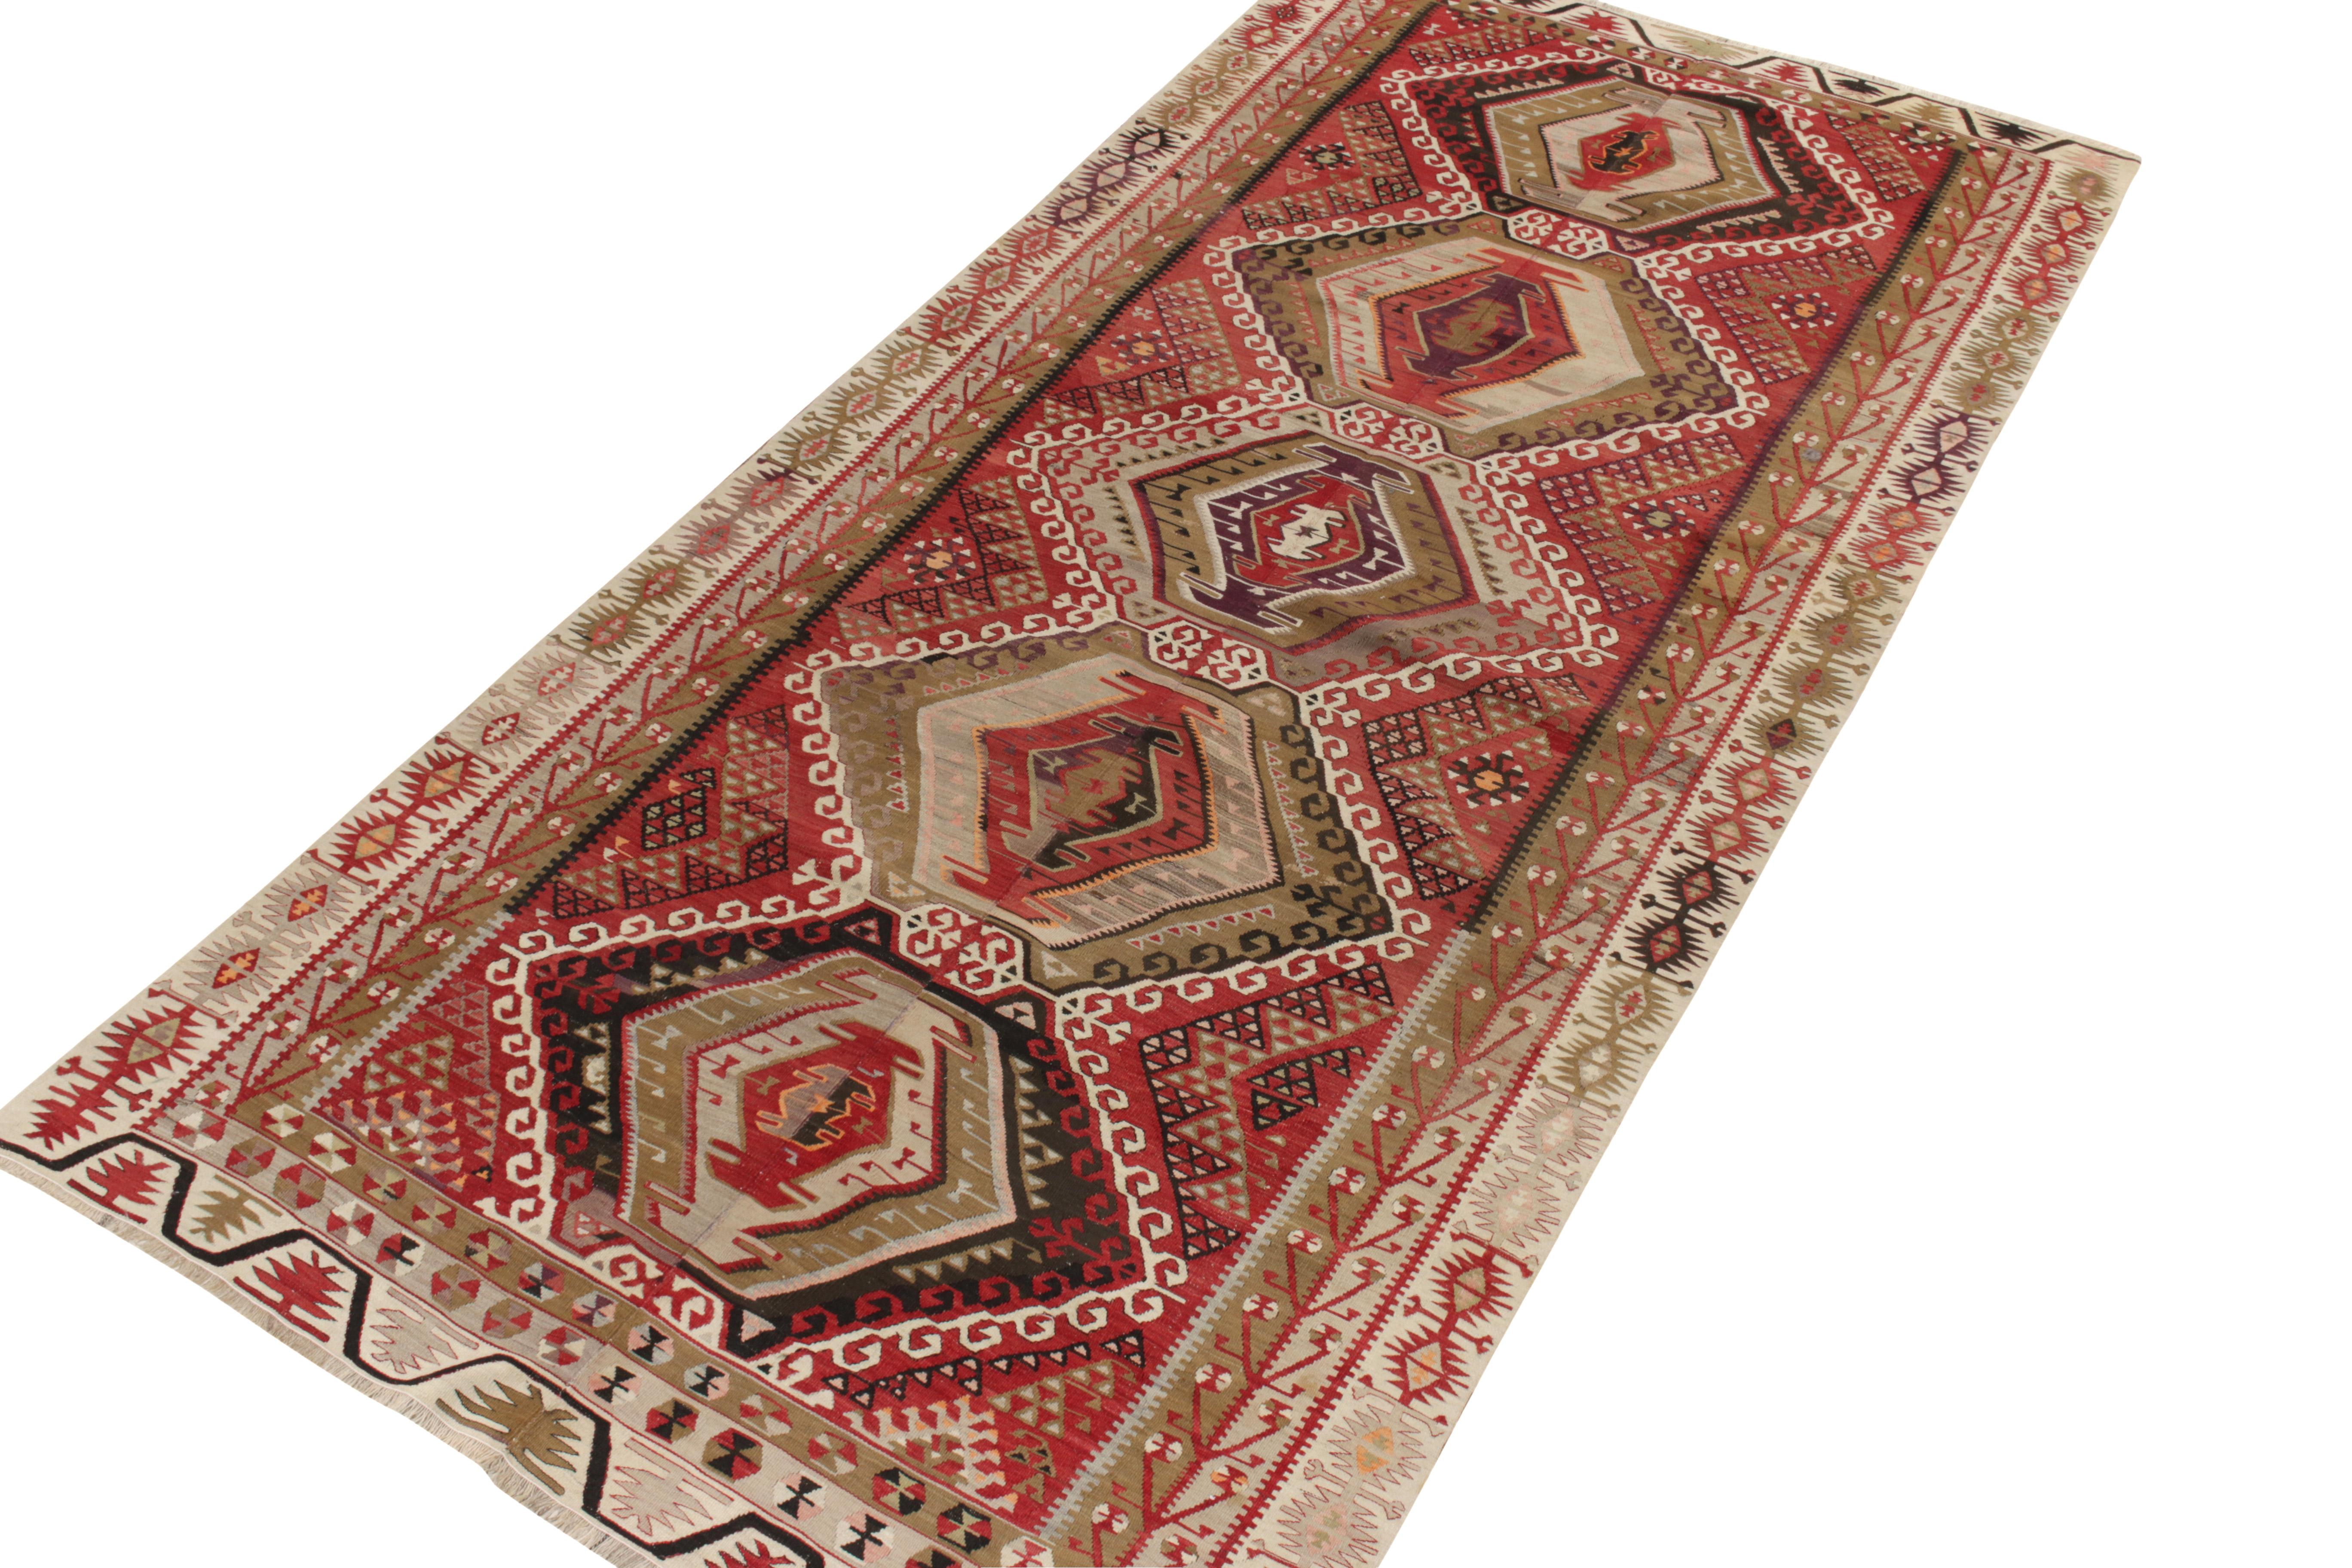 An ode to the Kayseri family of rugs, a 5x11 vintage Kilim in high-quality wool originating from Turkey between 1940-1950 exemplifying the tribal notes of the Anatolian region through tasteful asymmetric variations of the bold red, black, pista